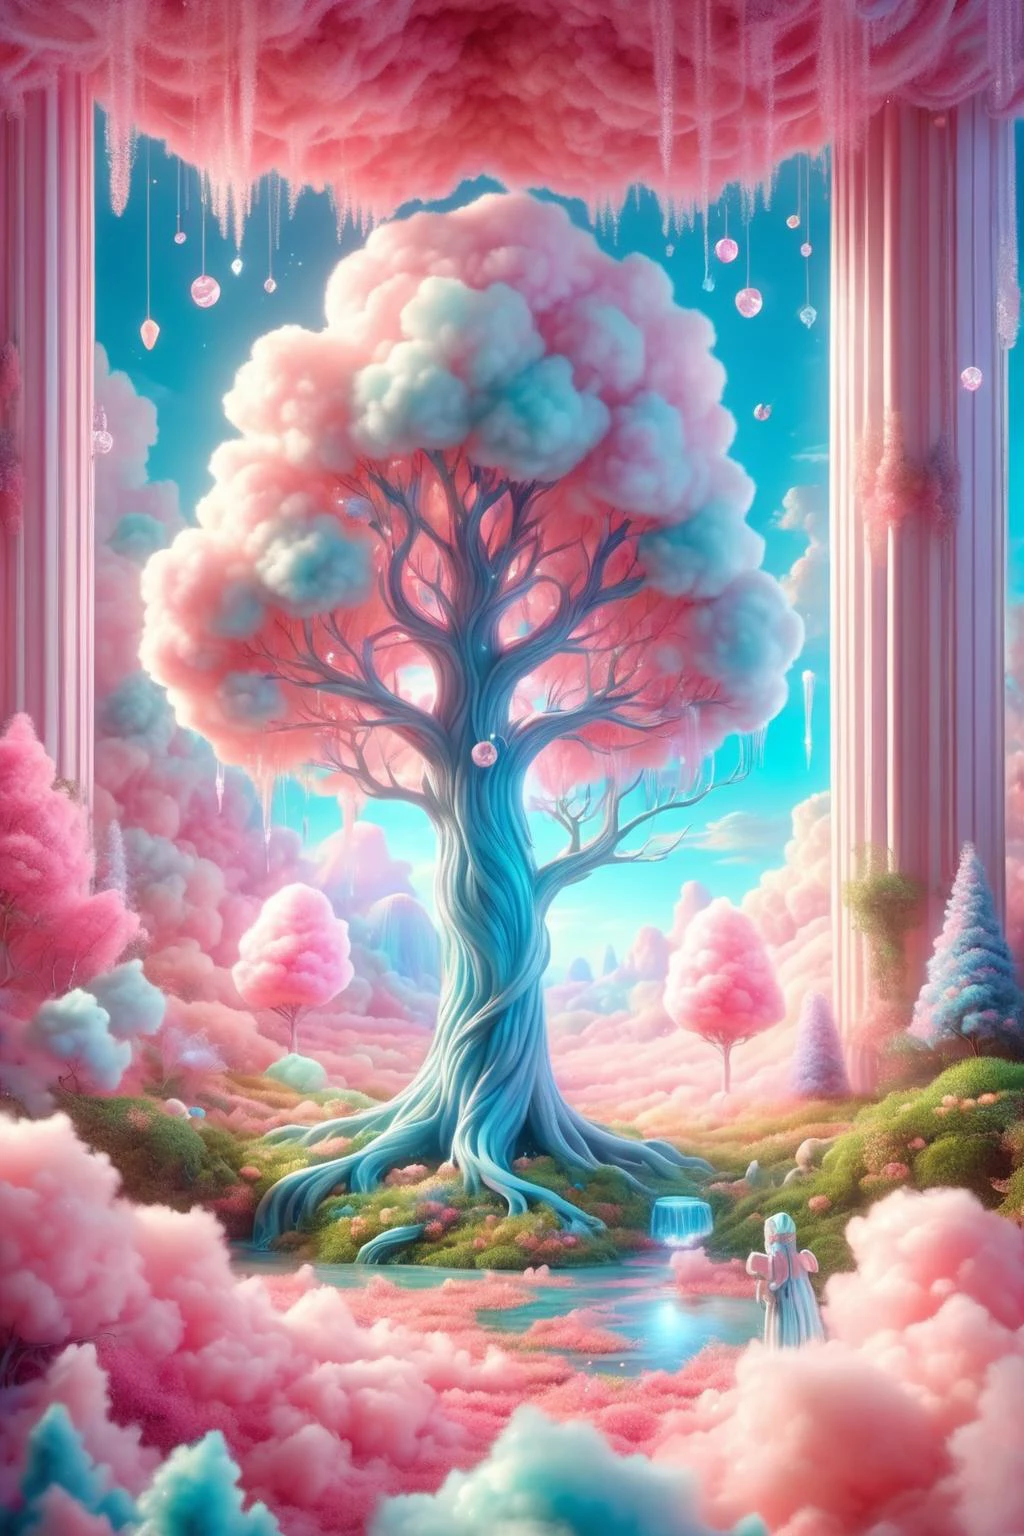 cottoncandy,
In a dreamlike realm stands a colossal tree with cotton candy-like foliage,beneath which exists a whimsical mini-ecosystem. Towering branches of this magical tree filter through dazzling rays of light,weaving an enchanting world of fairy tale illumination. Surrounding the grand tree are mythical creatures such as unicorns and phoenixes,amidst a wonderland where peculiar plants like candy vines and crystal fruits flourish. This scene seamlessly blends nature with fantasy,resembling a fantastical painting brought to life from dreams,
UHD,Extreme detail,natural light,volume light,fantasism,professional color,professional composition,colorful,